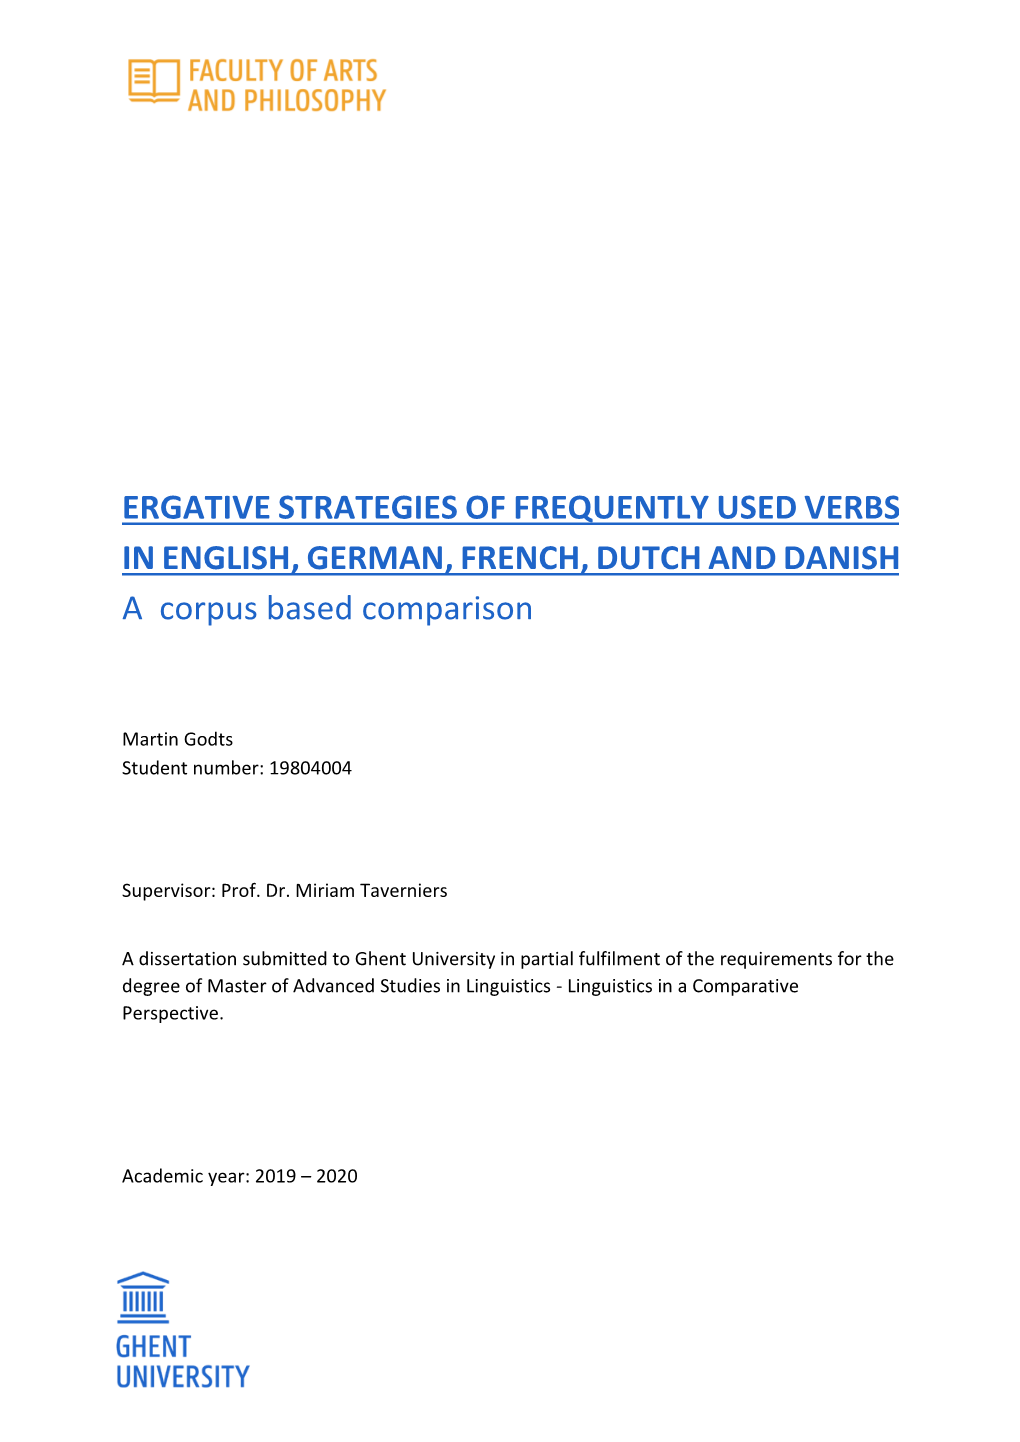 Ergative Strategies of Frequently Used Verbs in English, German, French, Dutch and Danish